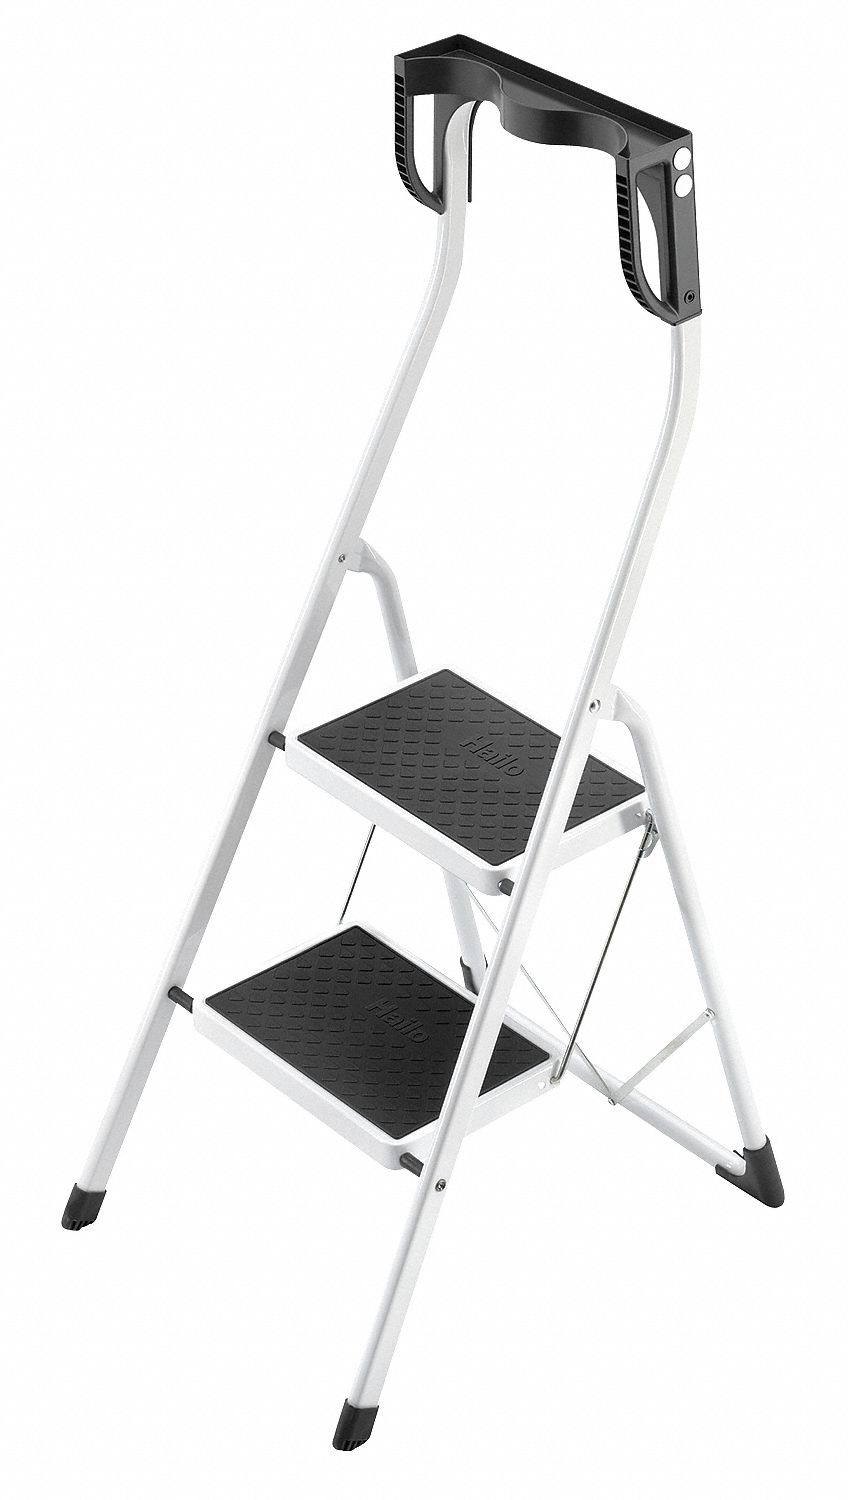 Folding Step: 2 Steps, 18 3/4 in Top Step Ht, 16 1/2 in Bottom Wd, 330 lb Load Capacity, White